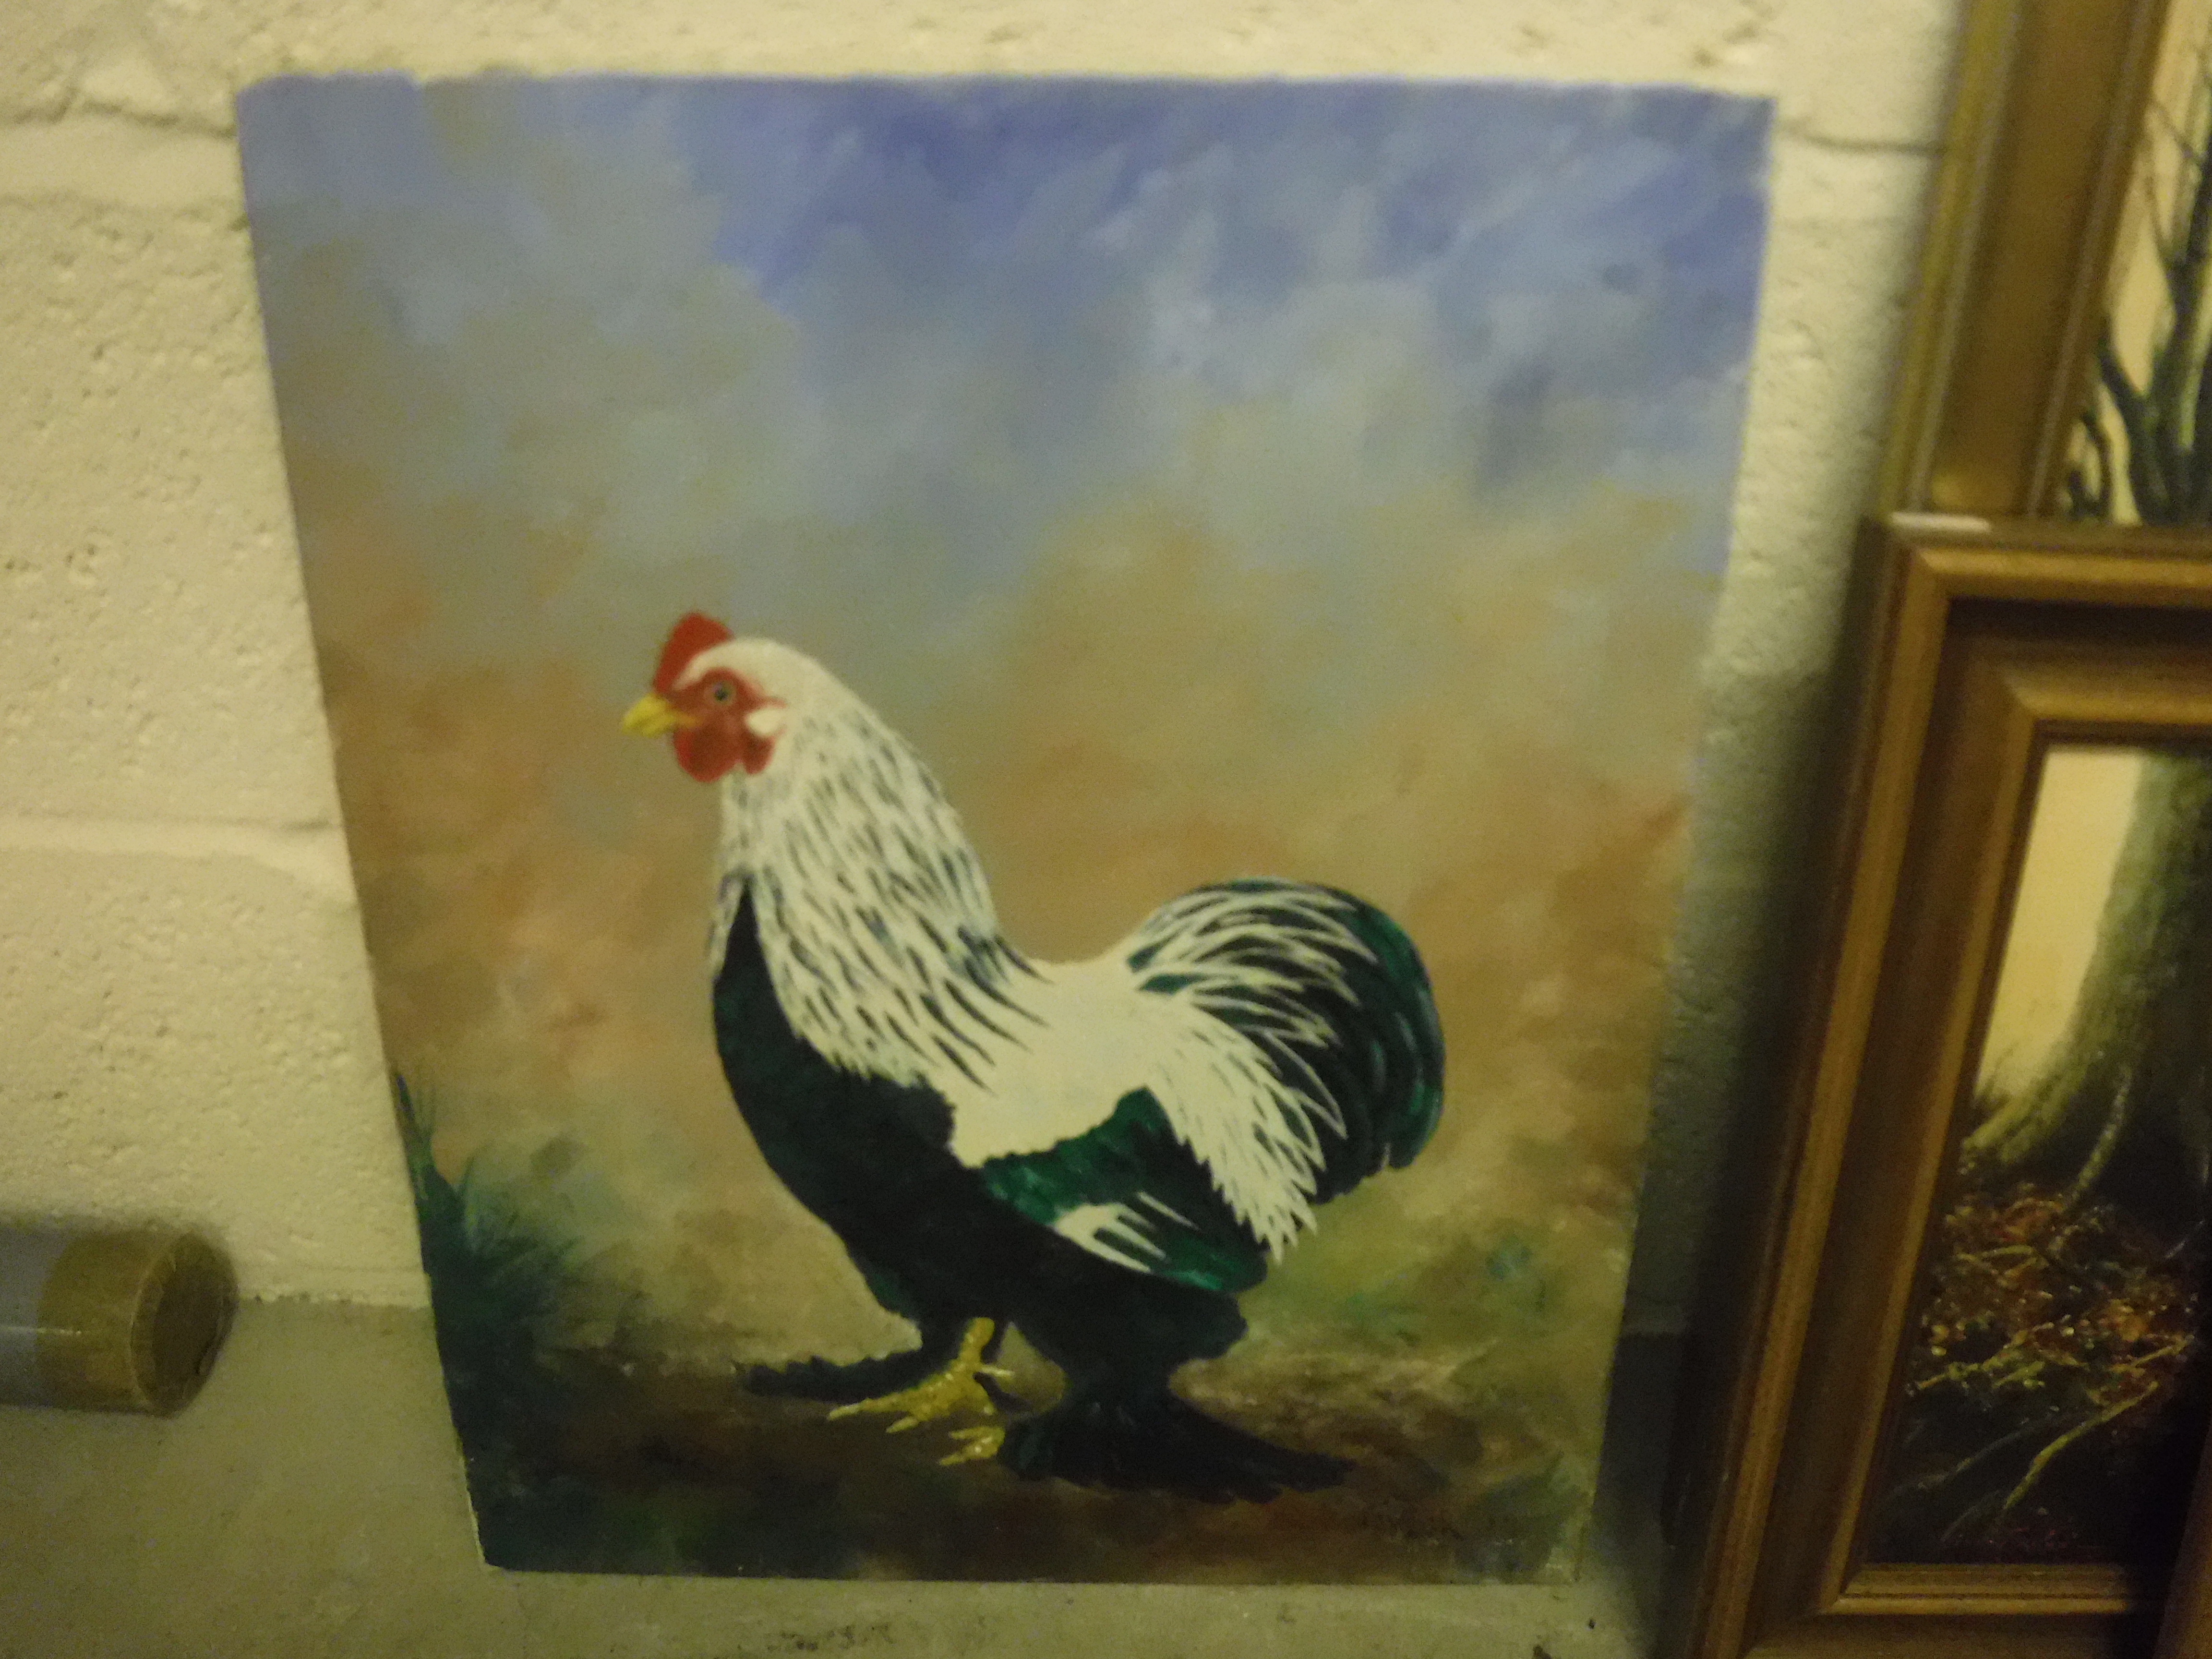 BEV TAYLOR "Chickens in a farmyard", oil on canvas, signed and dated '88 lower right, - Image 2 of 2